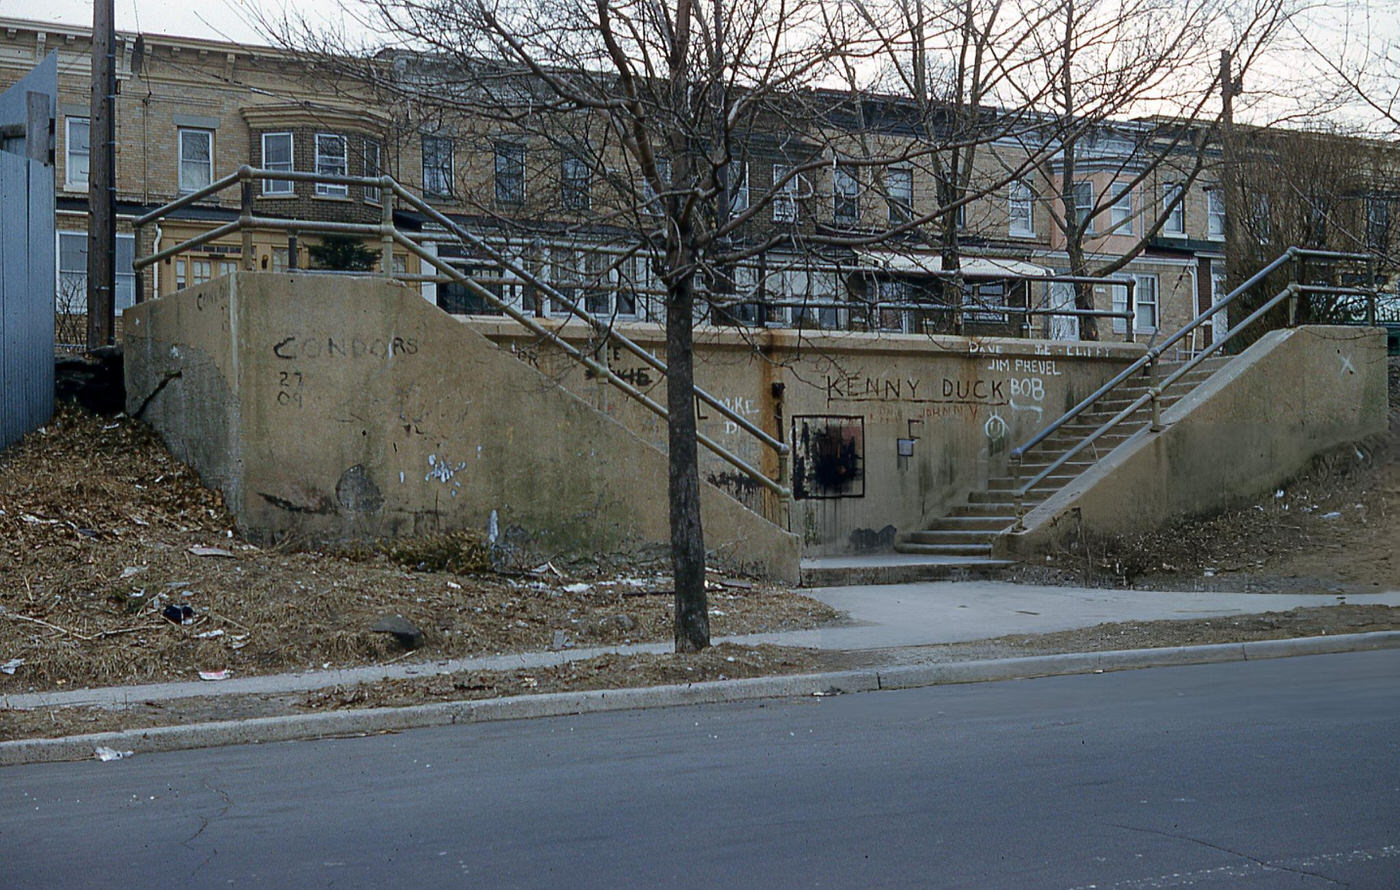 Dilapidated And Graffiti-Covered Cement Staircases Lead To A Row Of Homes On 37Th Avenue In Corona, Queens, 1960.